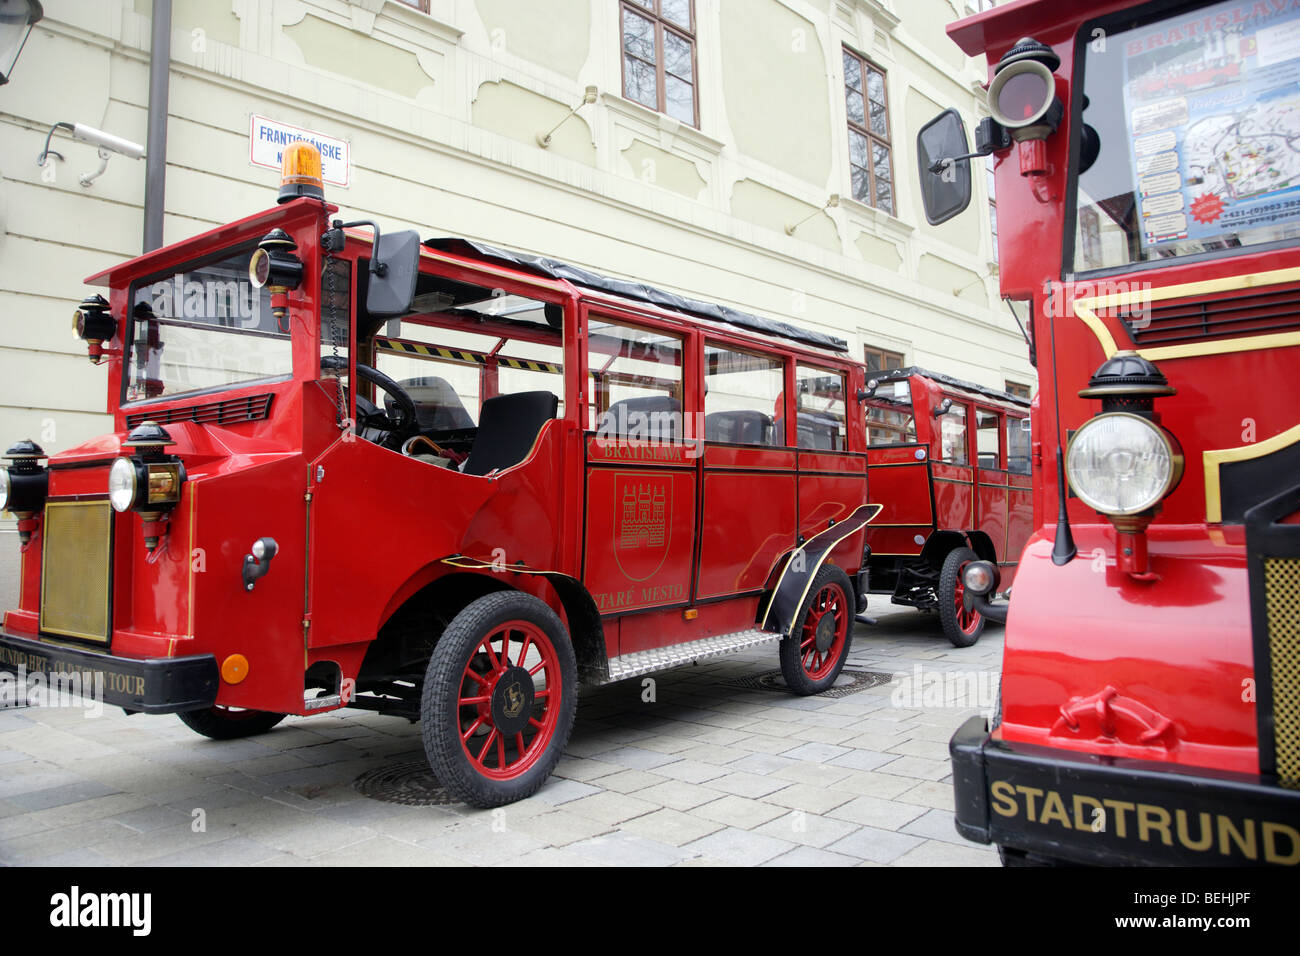 Red Buses for Sightseeing Bratislava Old Town, Slovakia Stock Photo